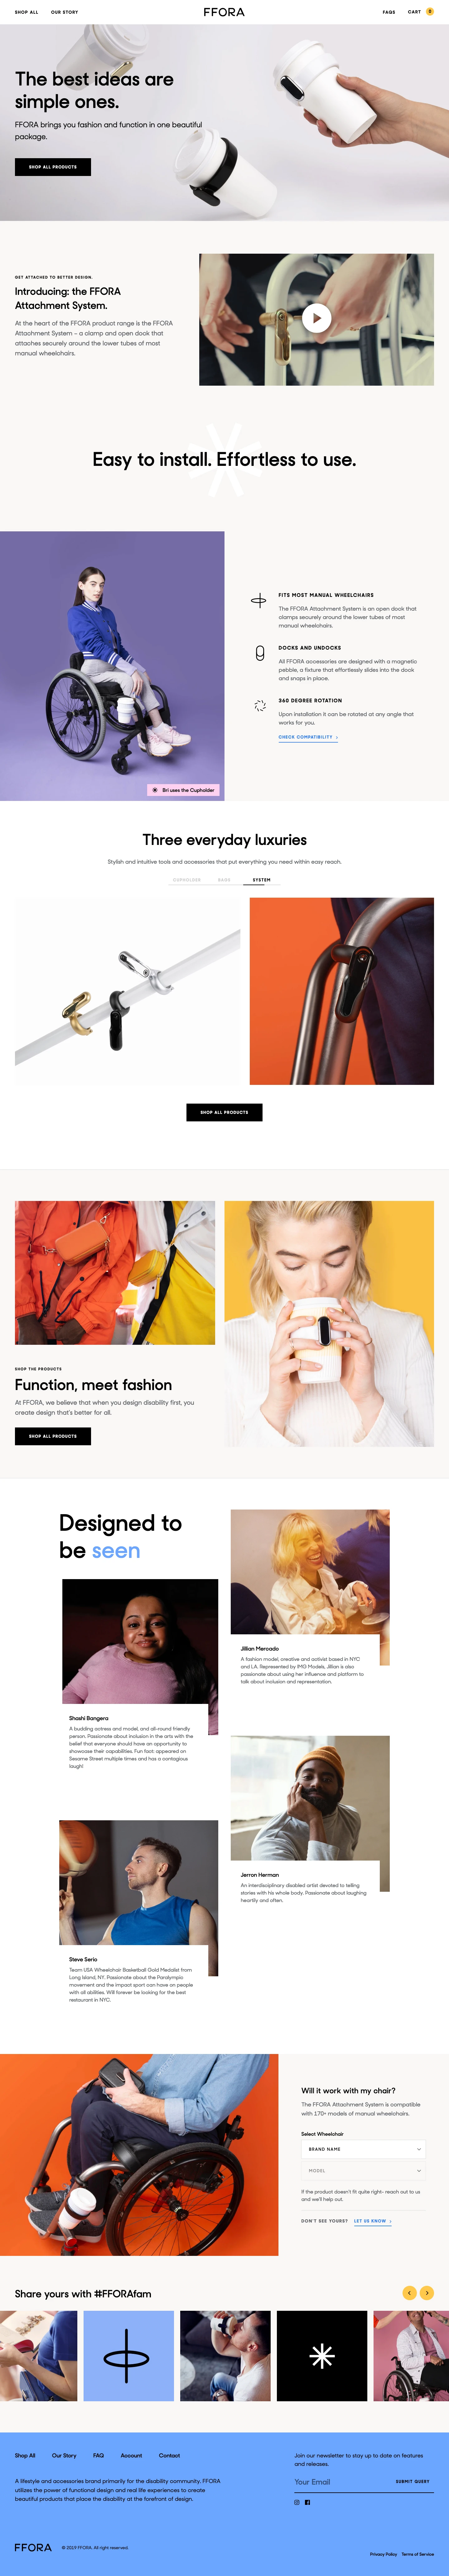 FFORA Landing Page Example: The best ideas are simple ones. FFORA brings you fashion and function in one beautiful package.